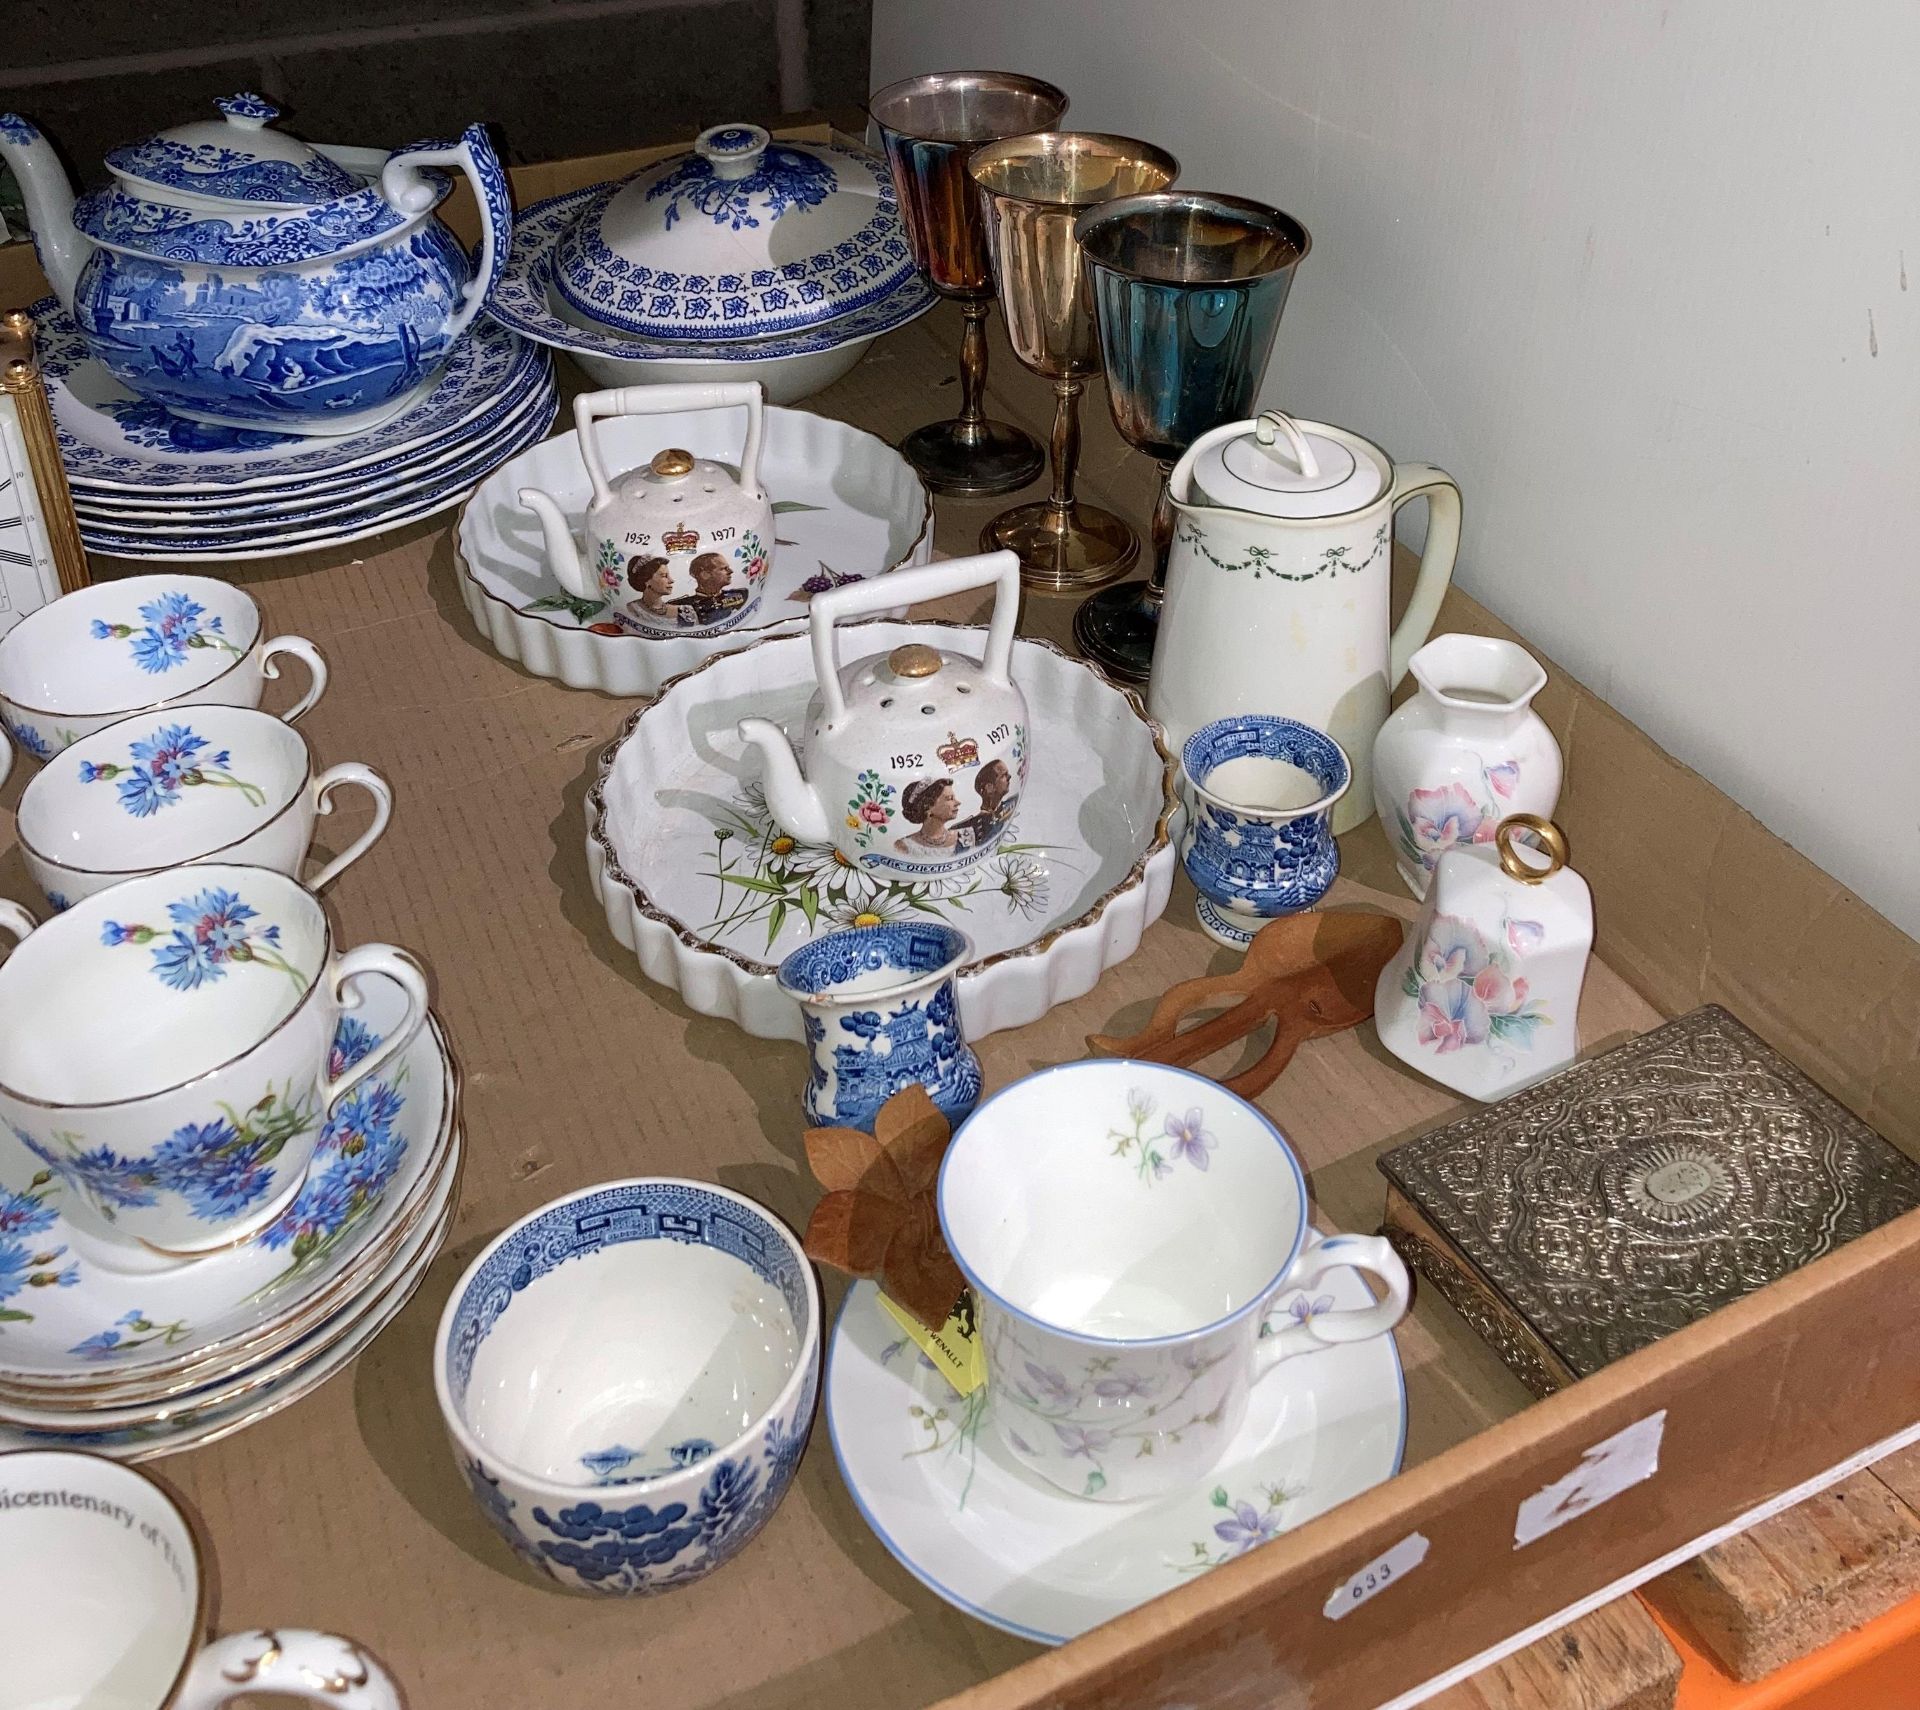 Contents to tray - 18-piece part tea service by Adderley, assorted ceramics by Aynsley, Copeland, - Image 3 of 3